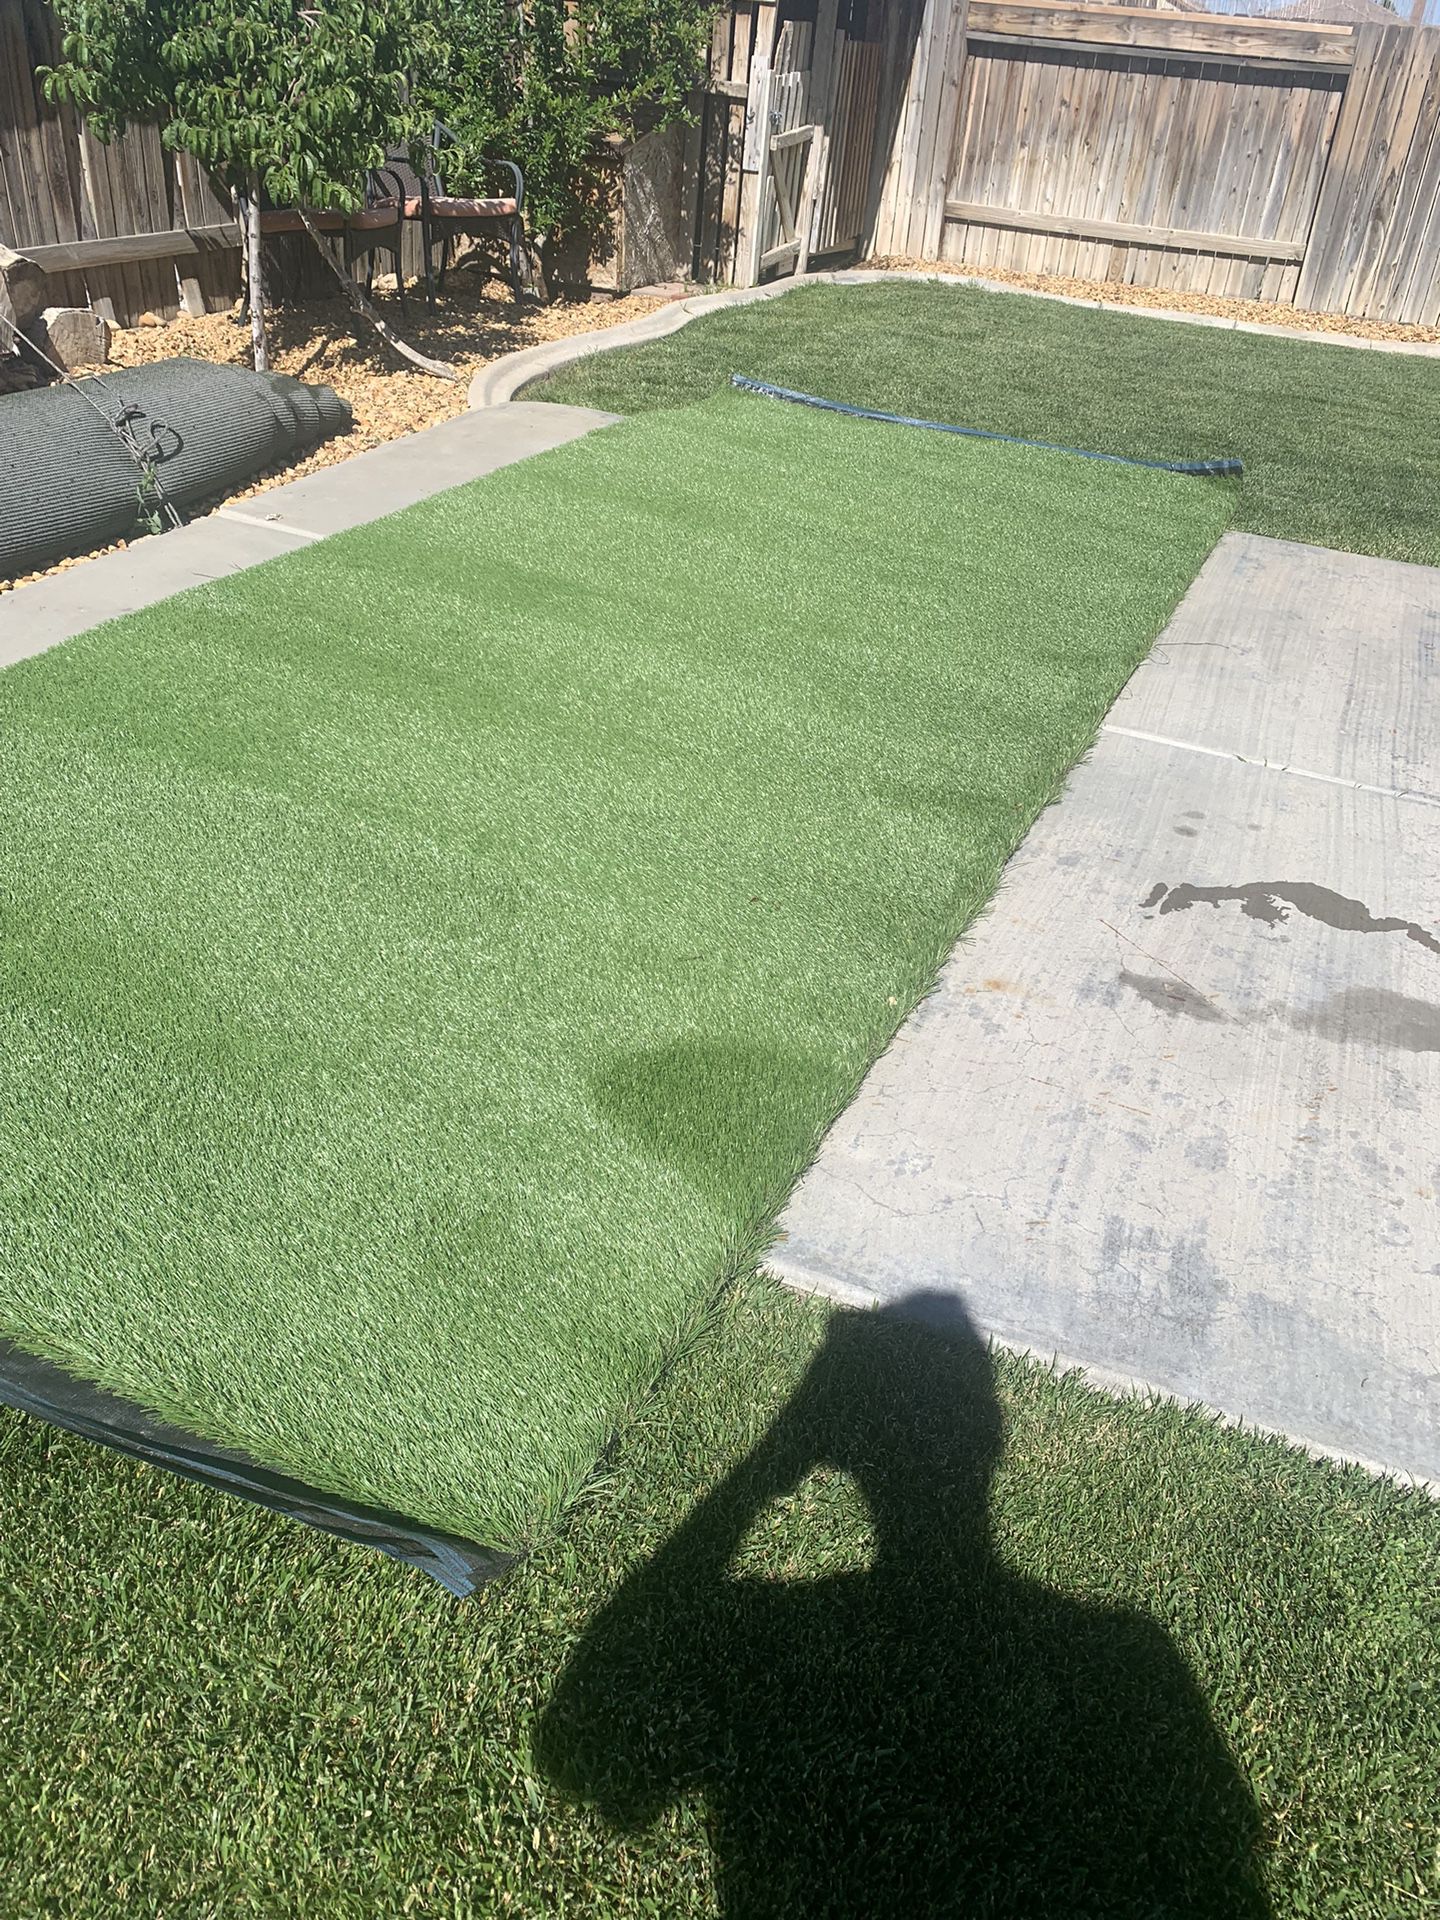 Two Pcs Of Artificial Grass For Sale 15’ X6’ 1/2